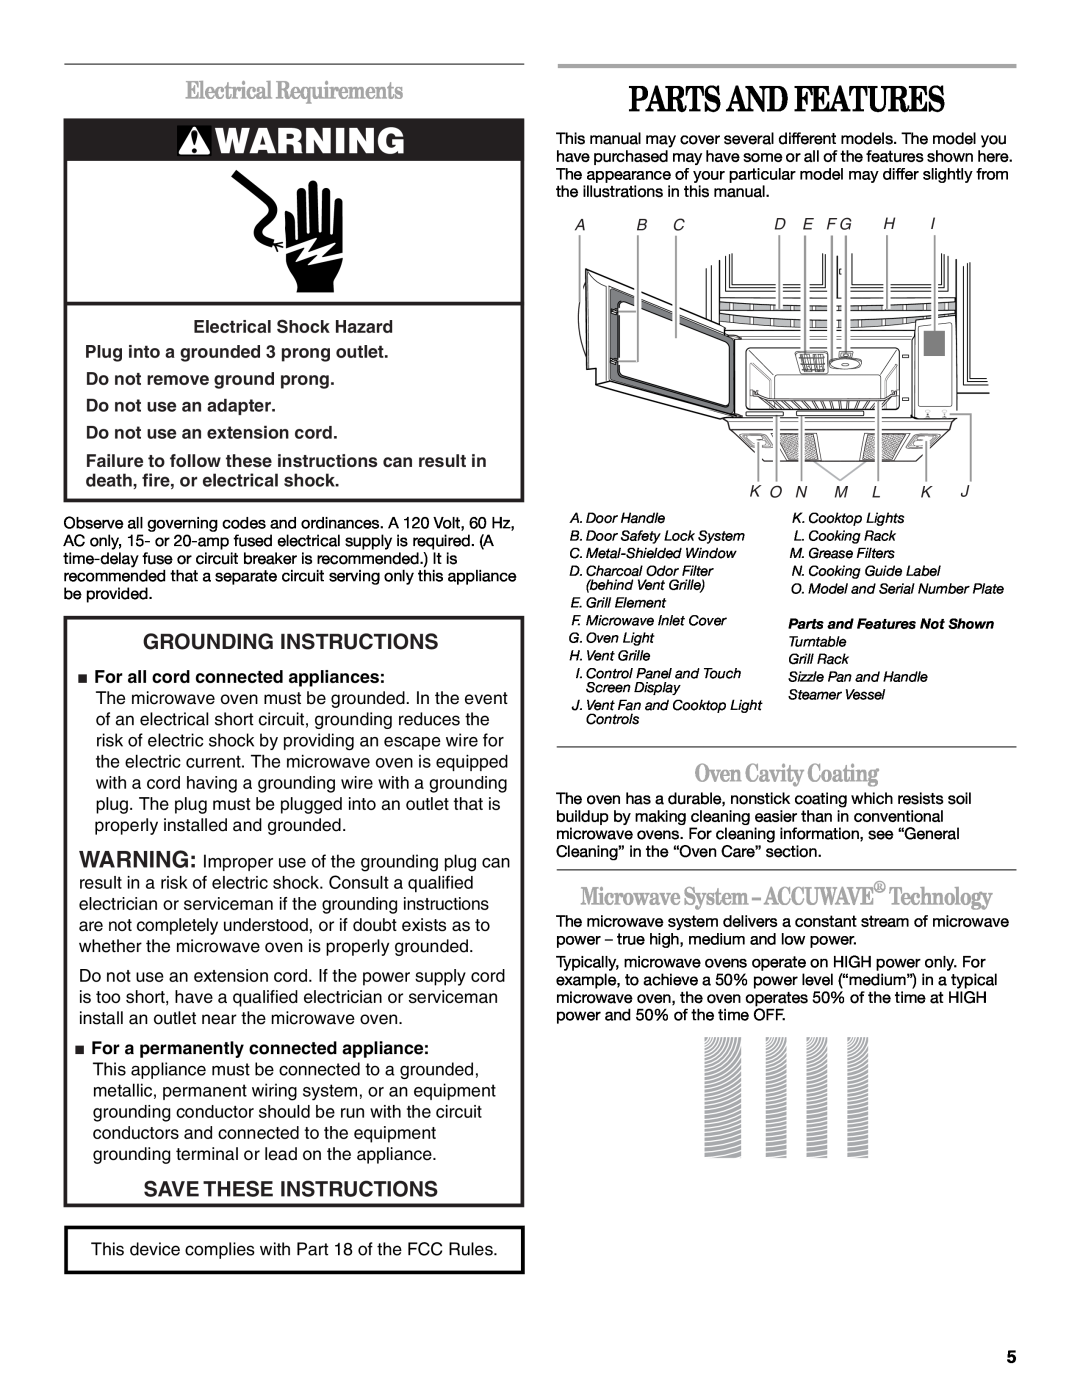 Whirlpool GH6178XP manual Parts And Features, Electrical Requirements, Oven Cavity Coating, Grounding Instructions 